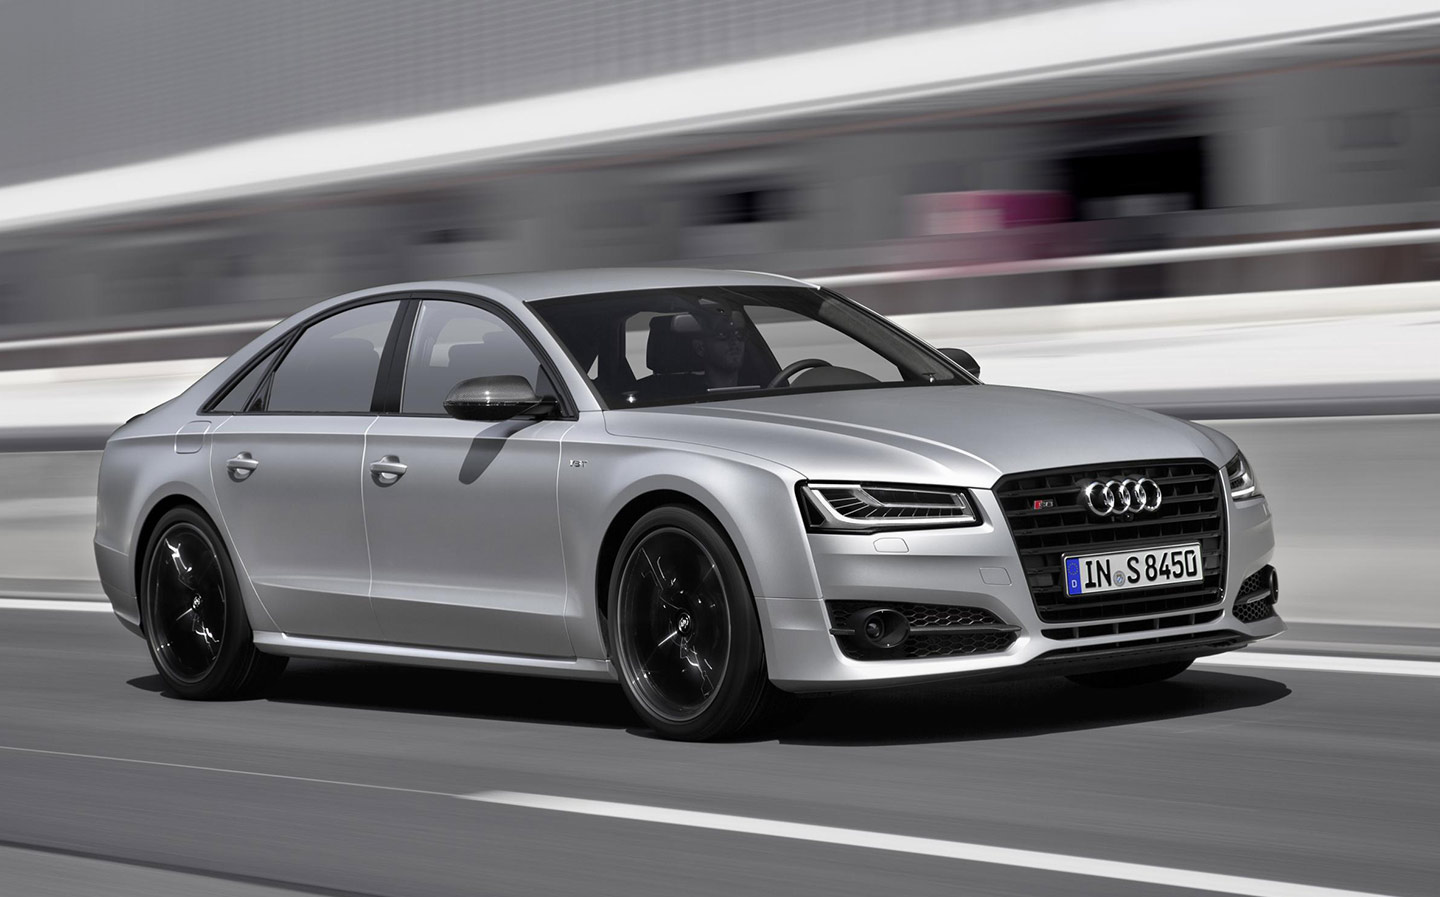 2016 Audi S8 review by Jeremy Clarkson for Sunday Times